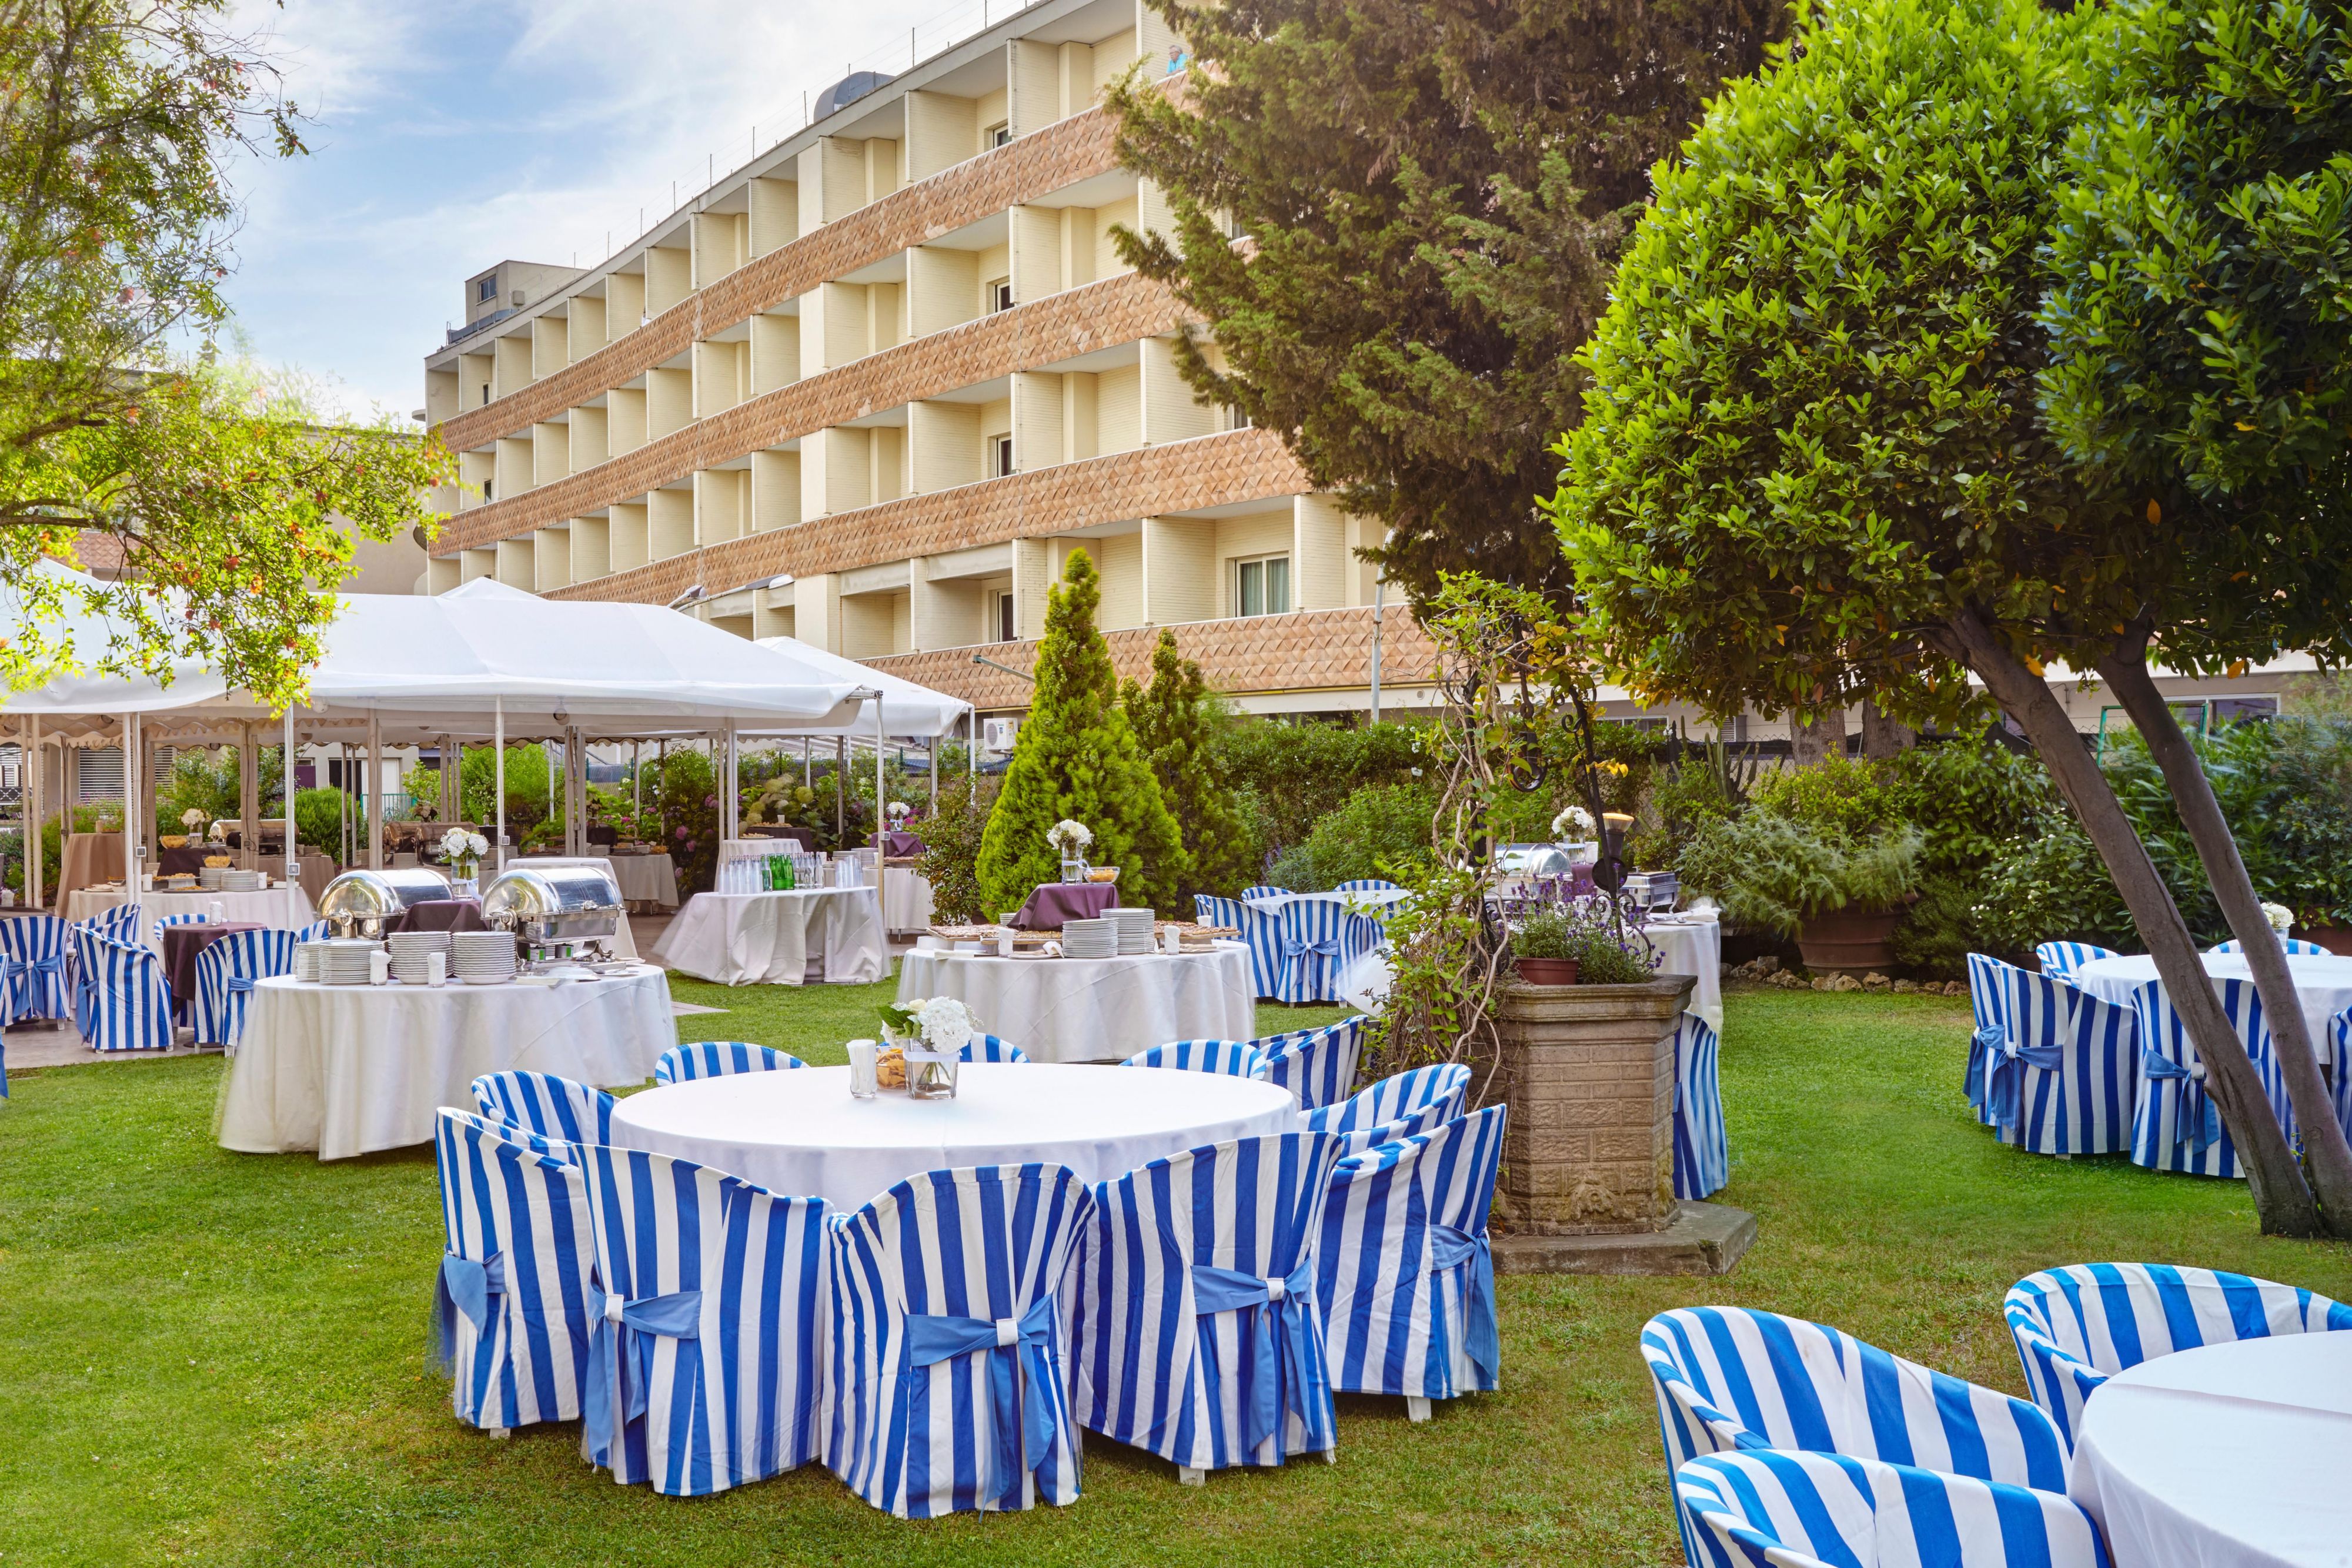 Organize your special event in our beautiful gardens by the pool